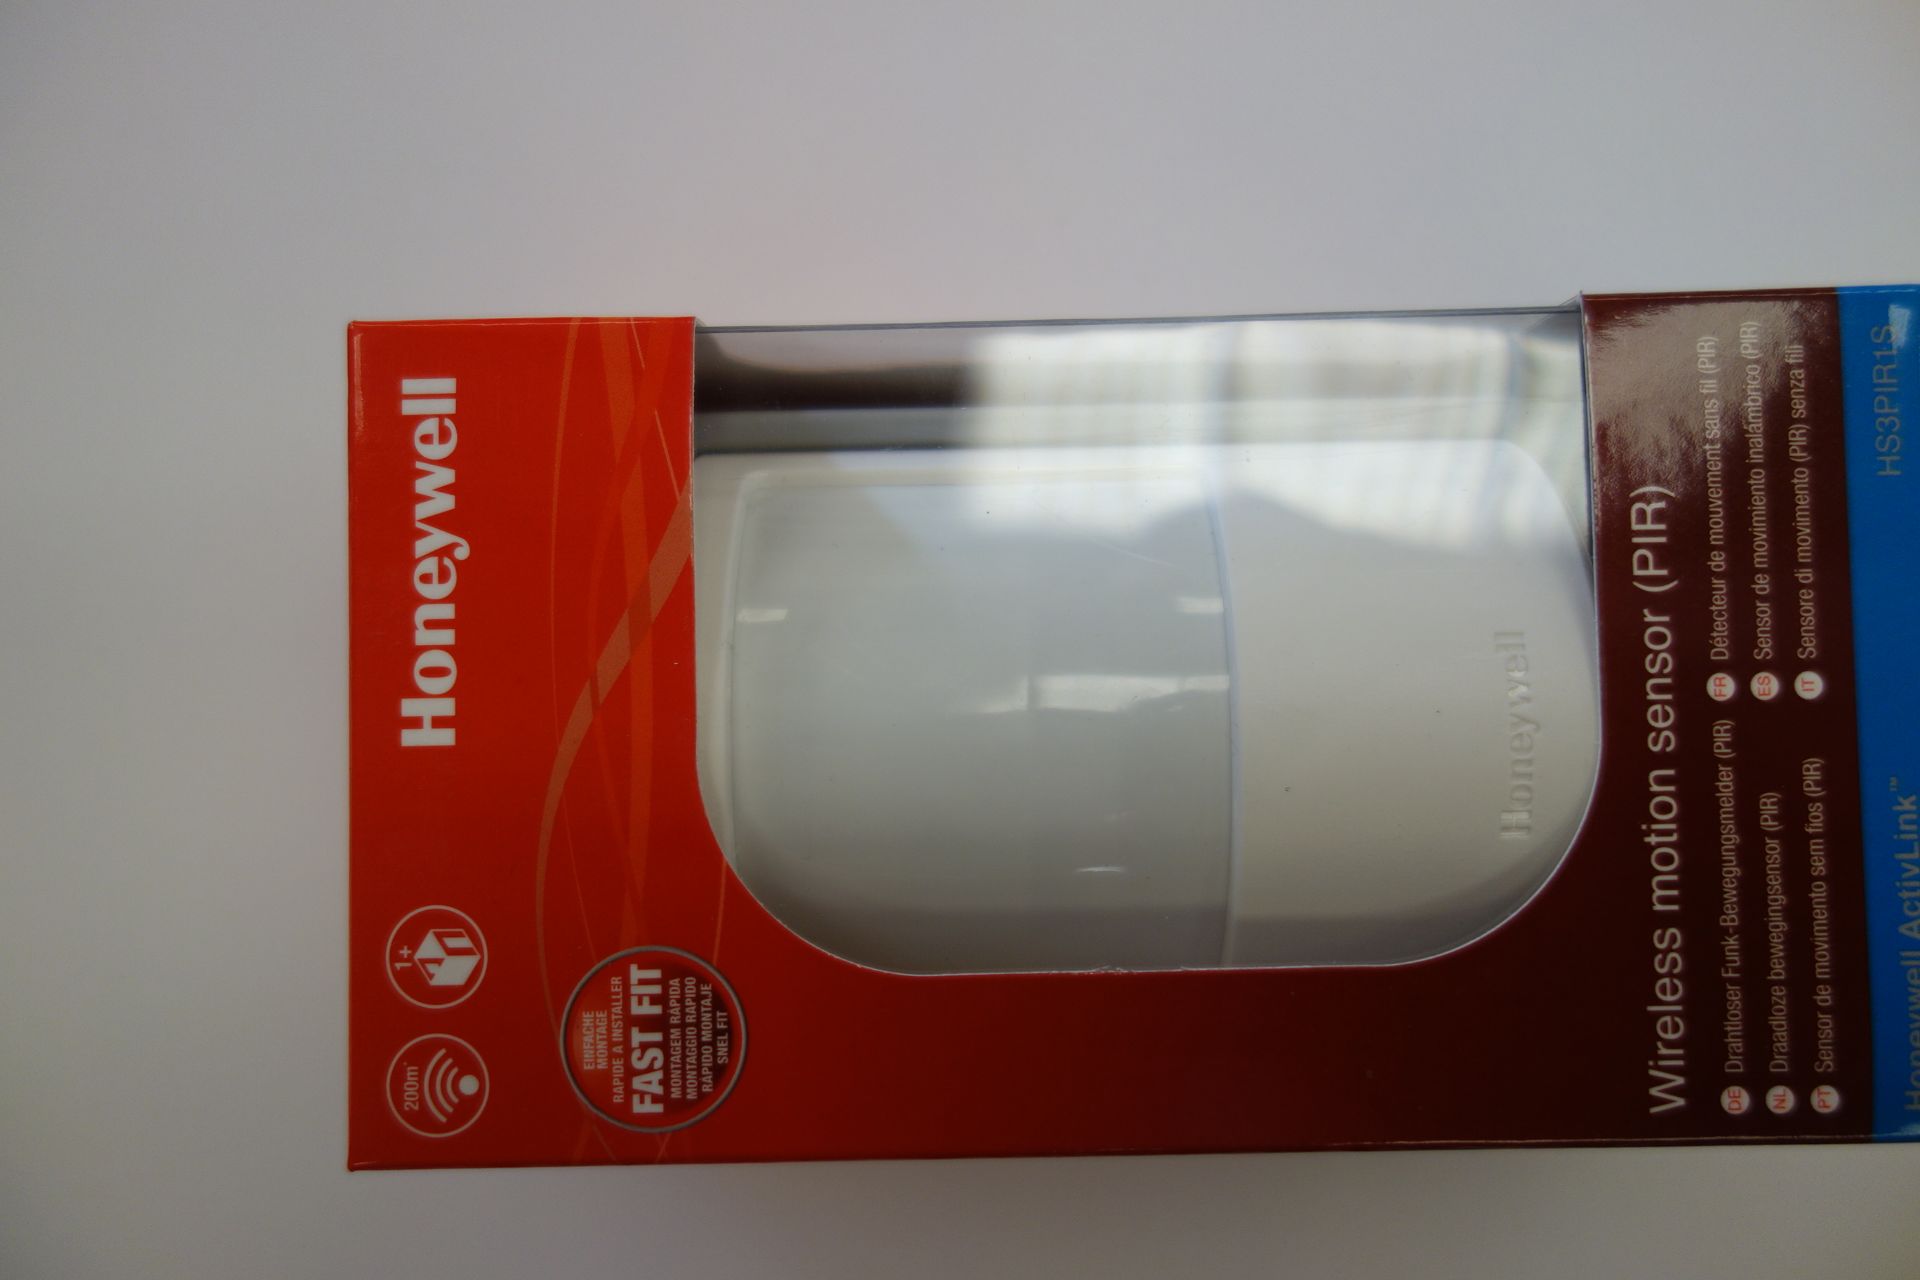 8 X Honeywell H53PIRS Wireless Motion Sensor PIR Large Areas The Home With 105 Degres Sensor Area